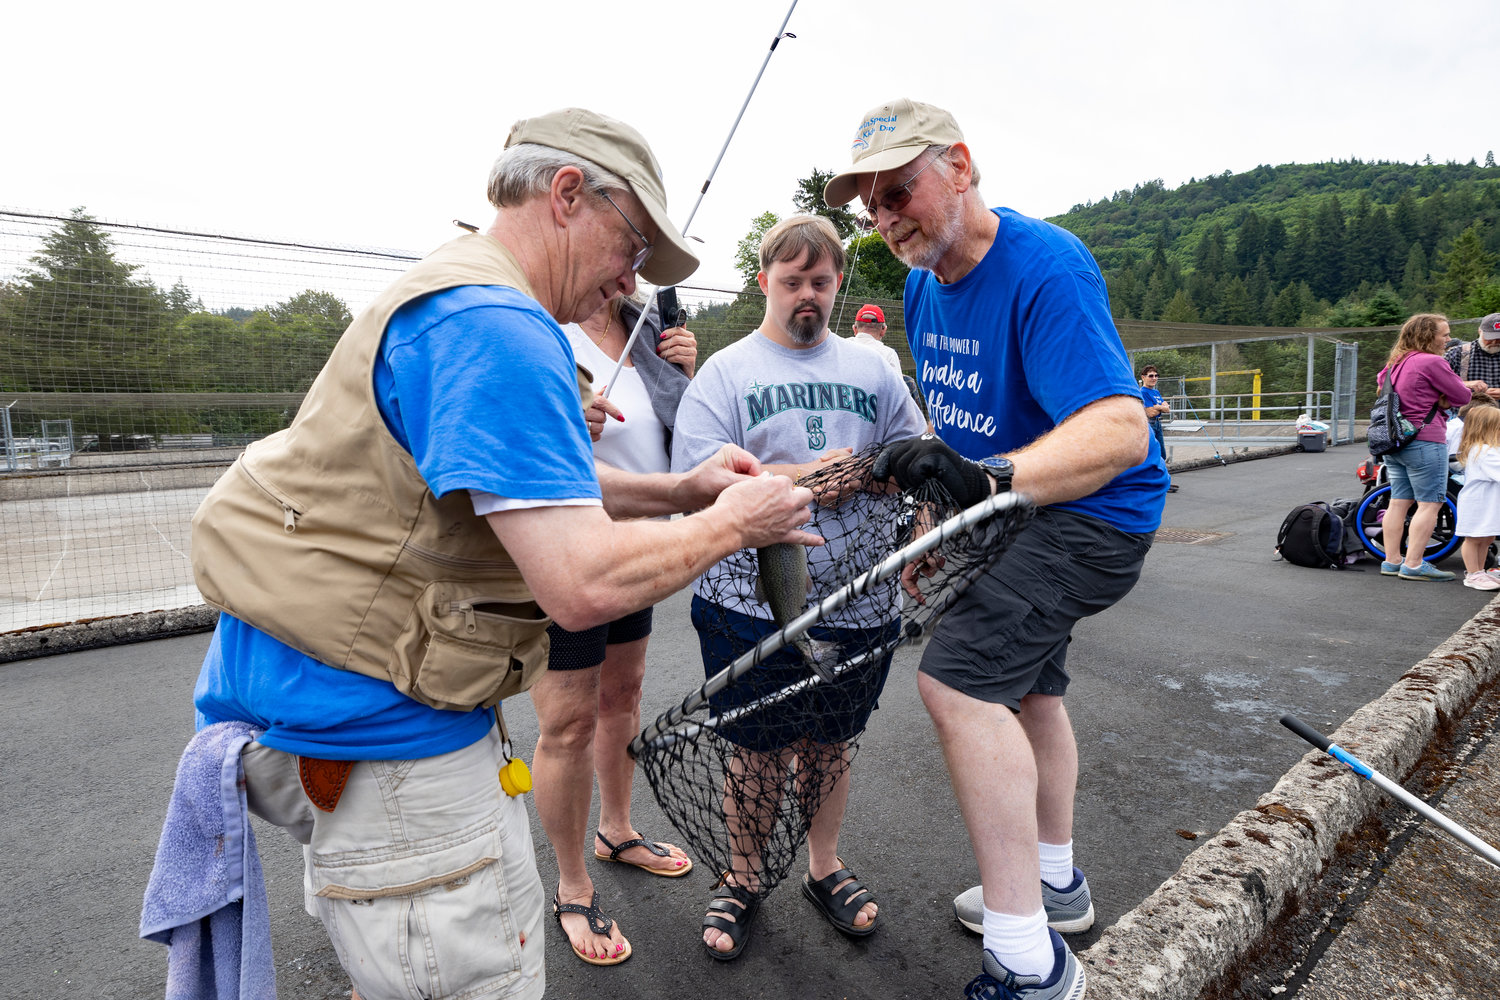 A volunteer helps unhook a fish caught during the Merwin Special Kids Day event in Woodland on July 9.